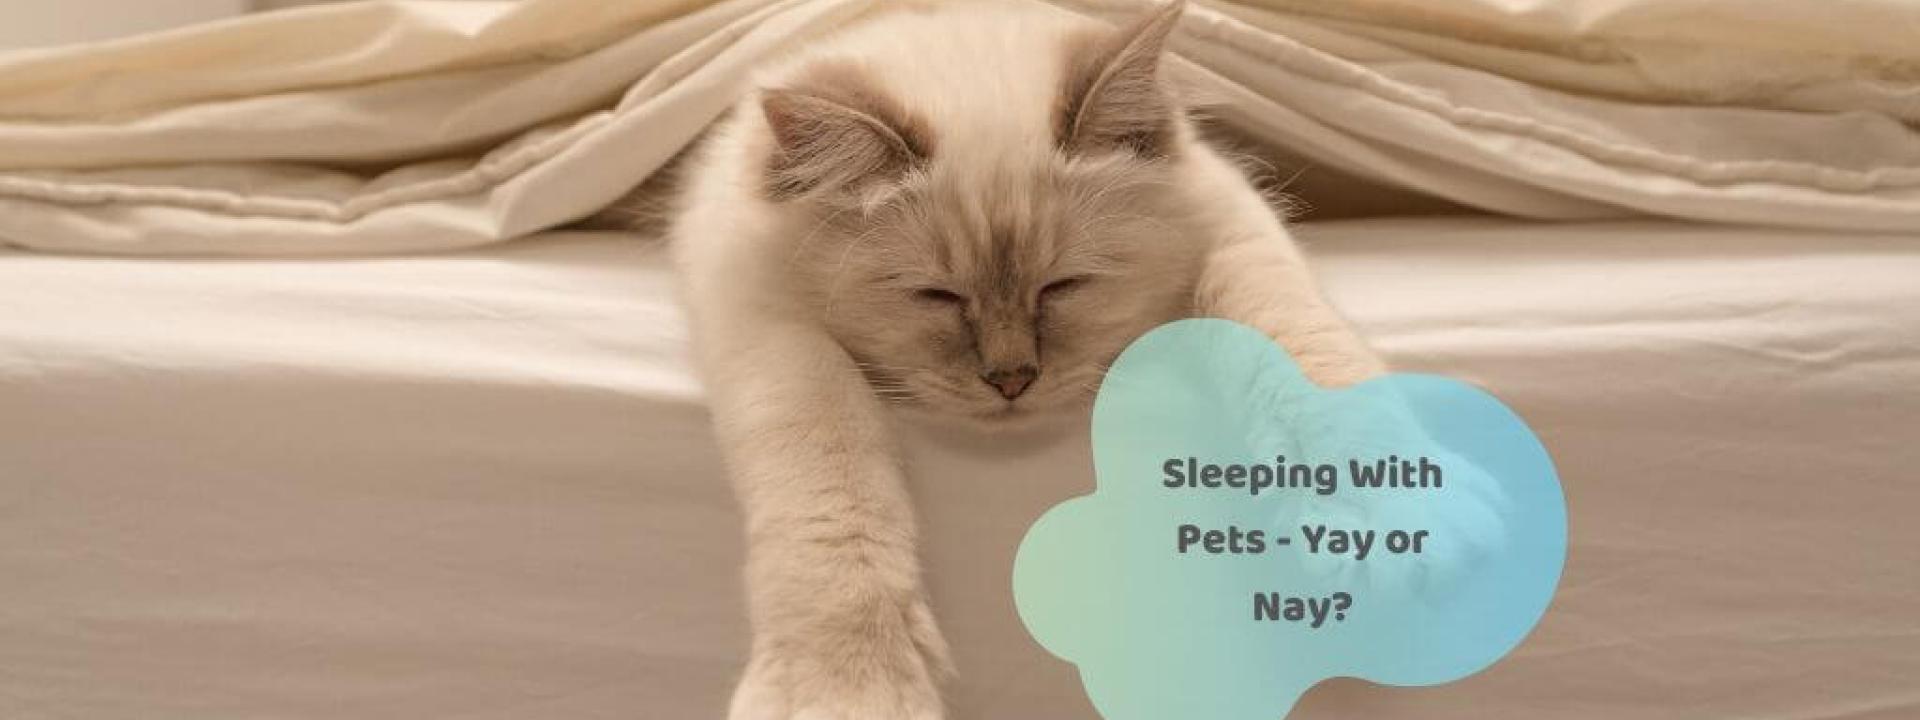 sleeping-with-pets-possible-health-issues.jpg